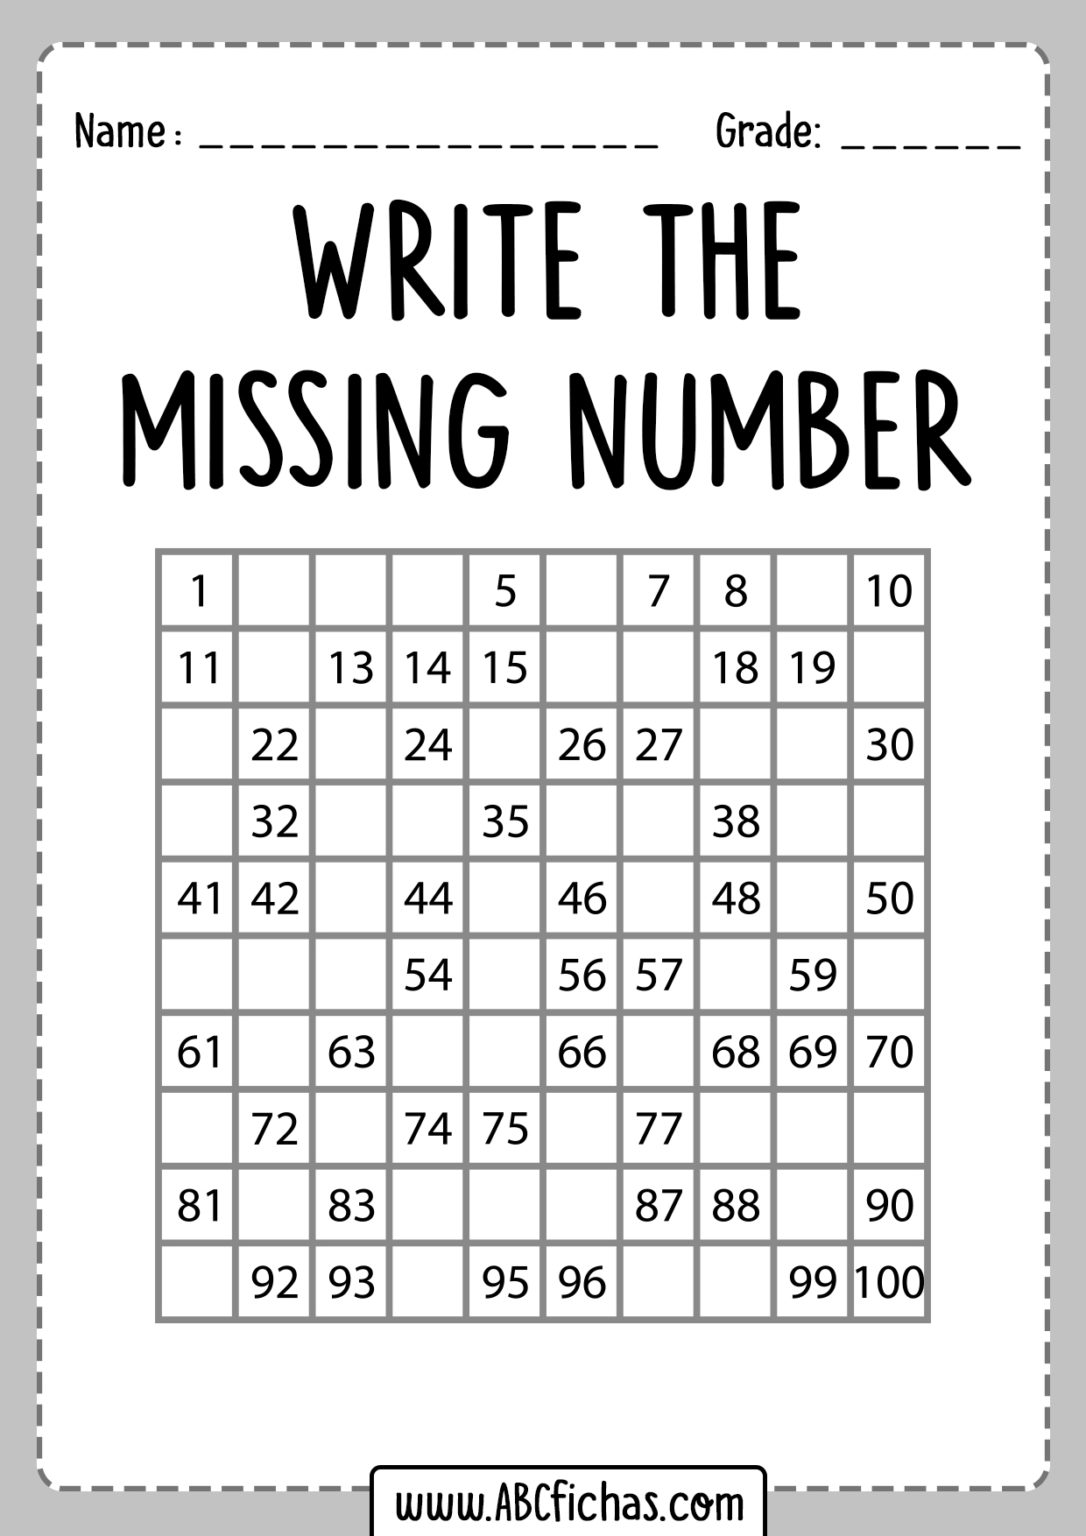 write-the-missing-number-1-100-abc-fichas